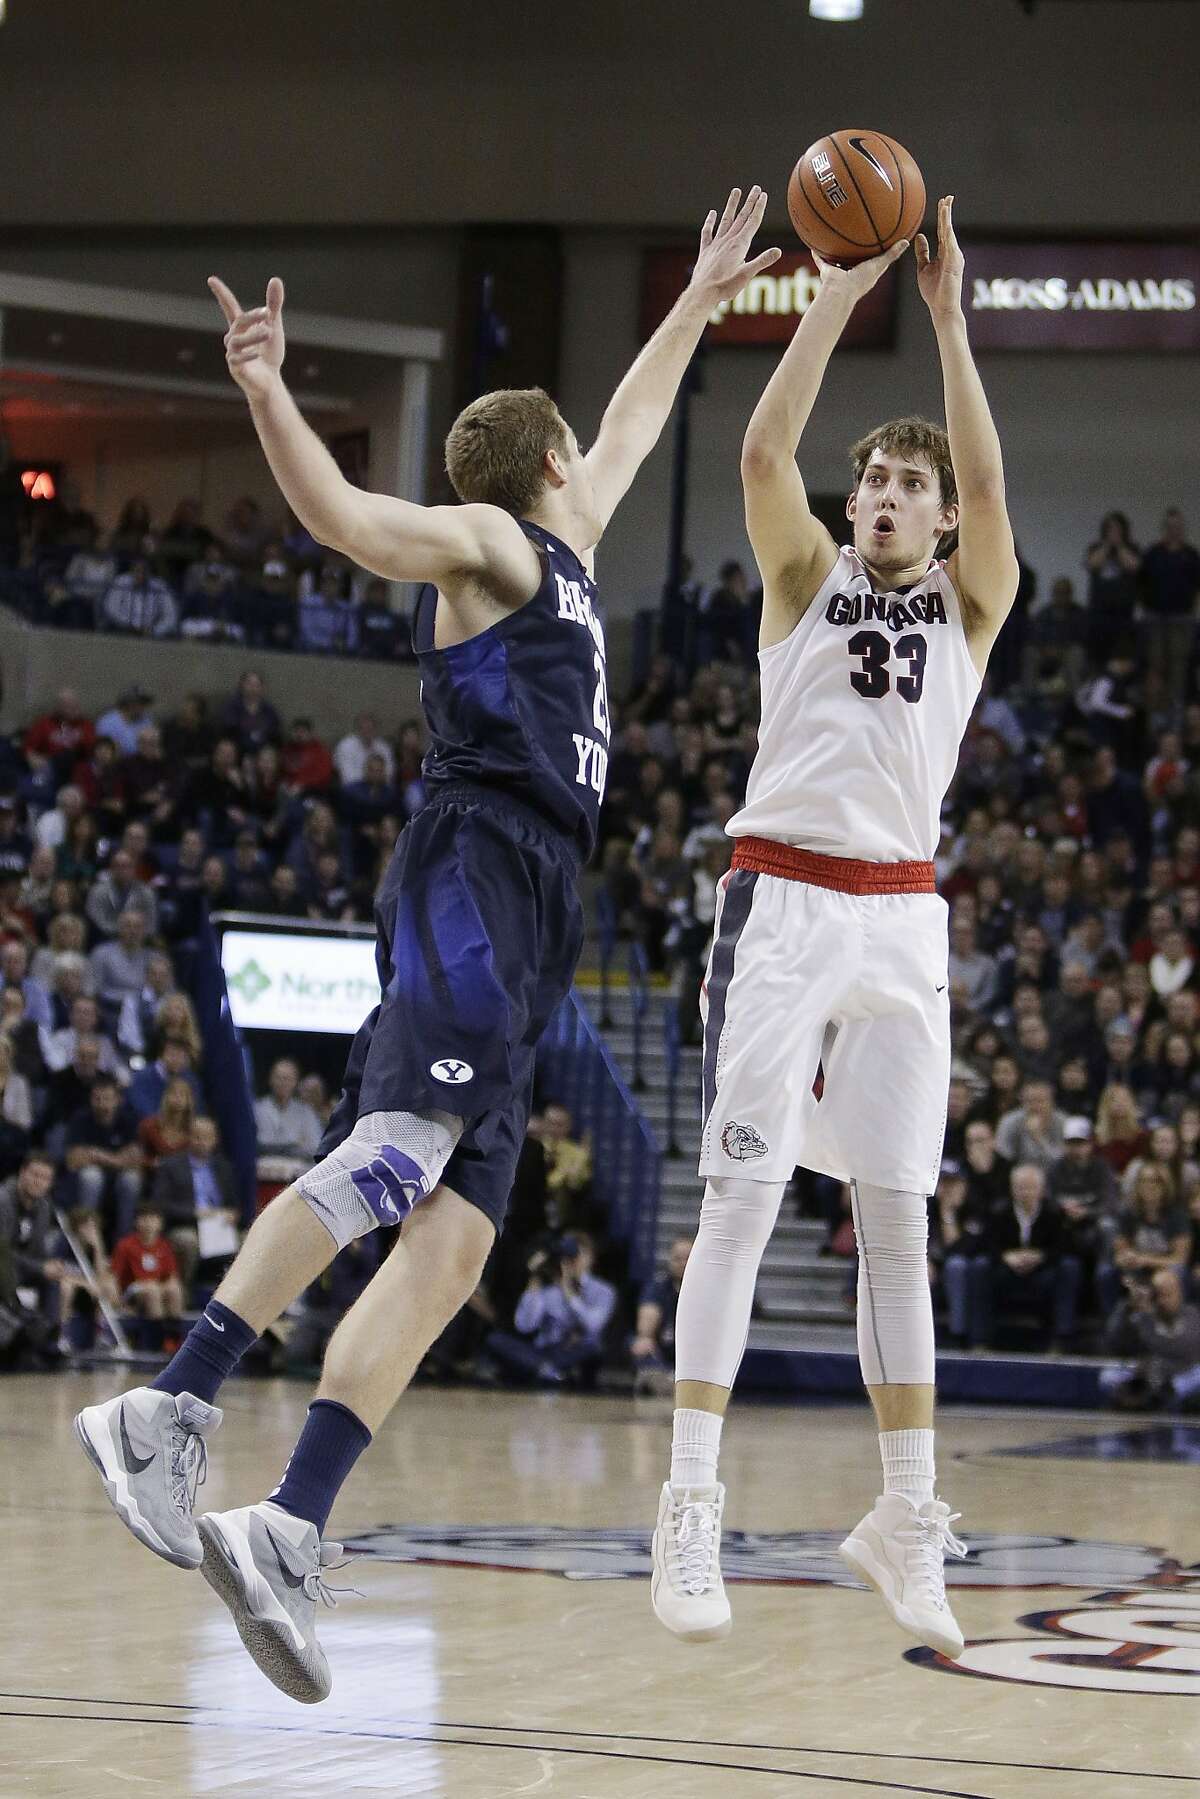 Gonzaga's Kyle Wiltjer (33) shoots against BYU's Kyle Davis during the second half of an NCAA college basketball game, Thursday, Jan. 14, 2016, in Spokane, Wash. (AP Photo/Young Kwak)